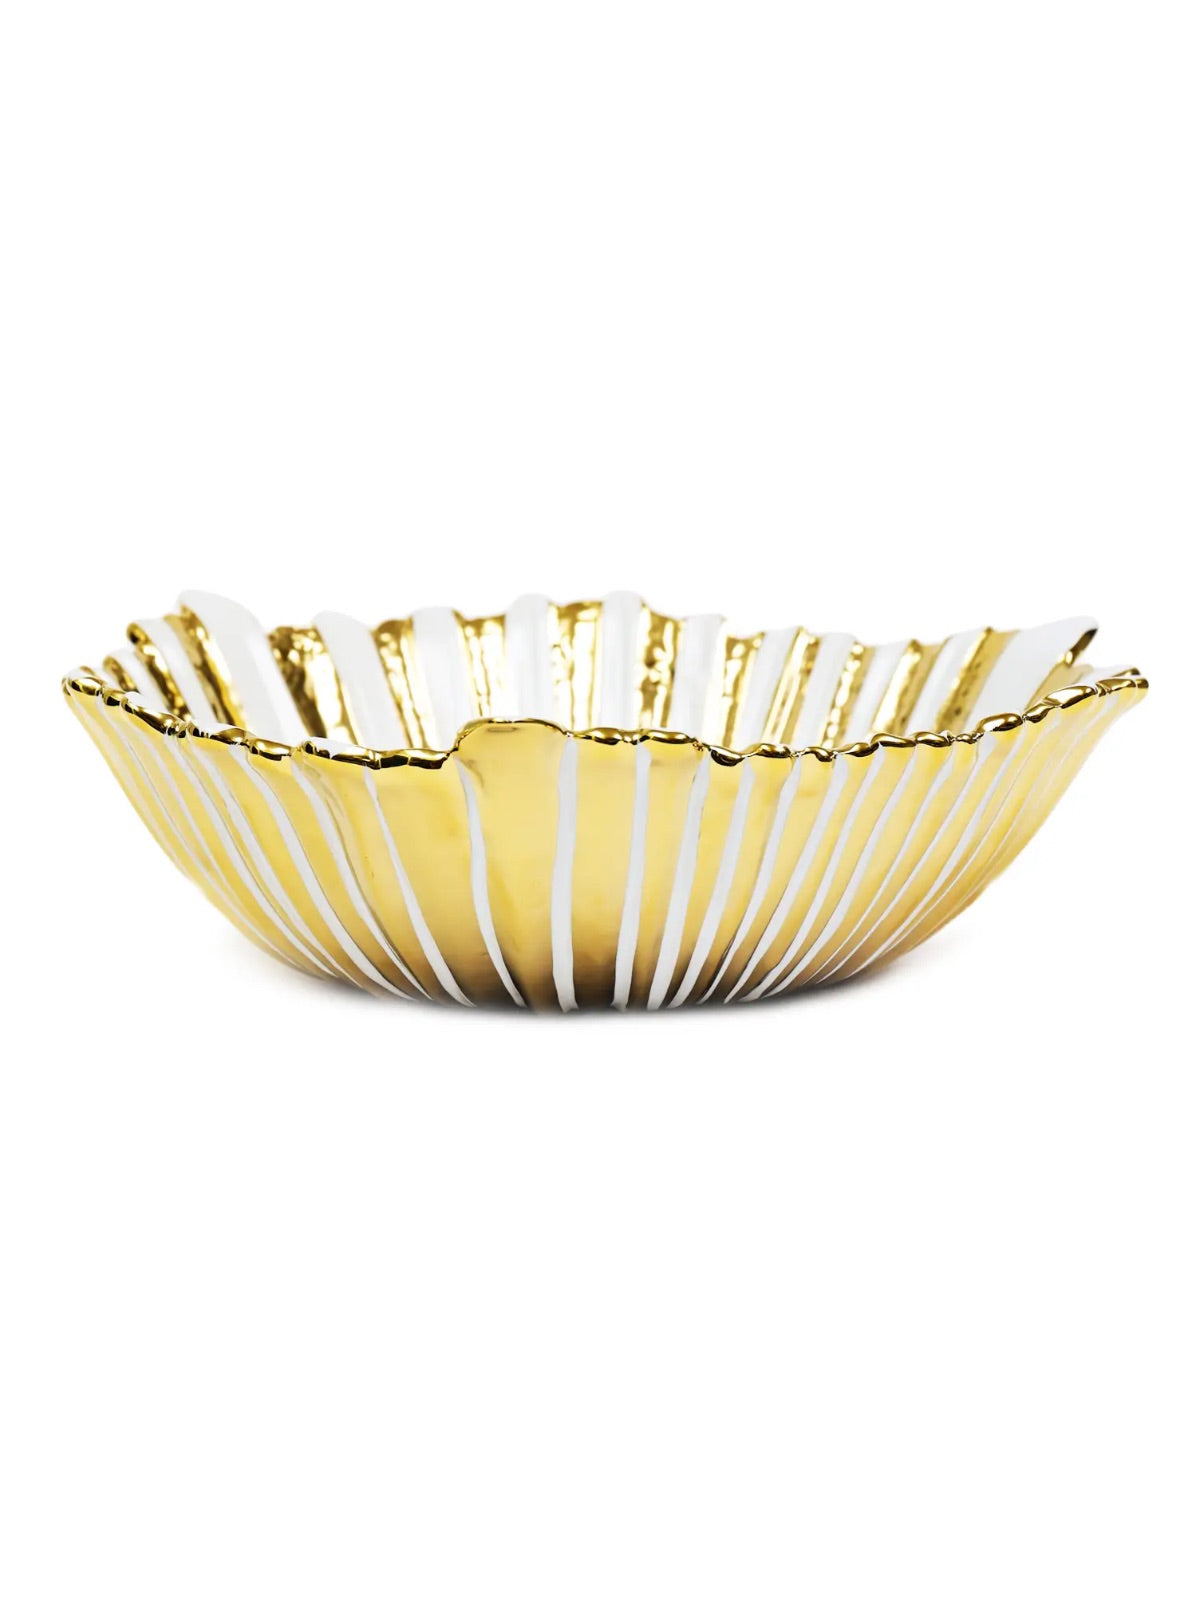 White and Gold Striped Flower Luxury Shaped Salad Bowl sold by KYA Home Decor.